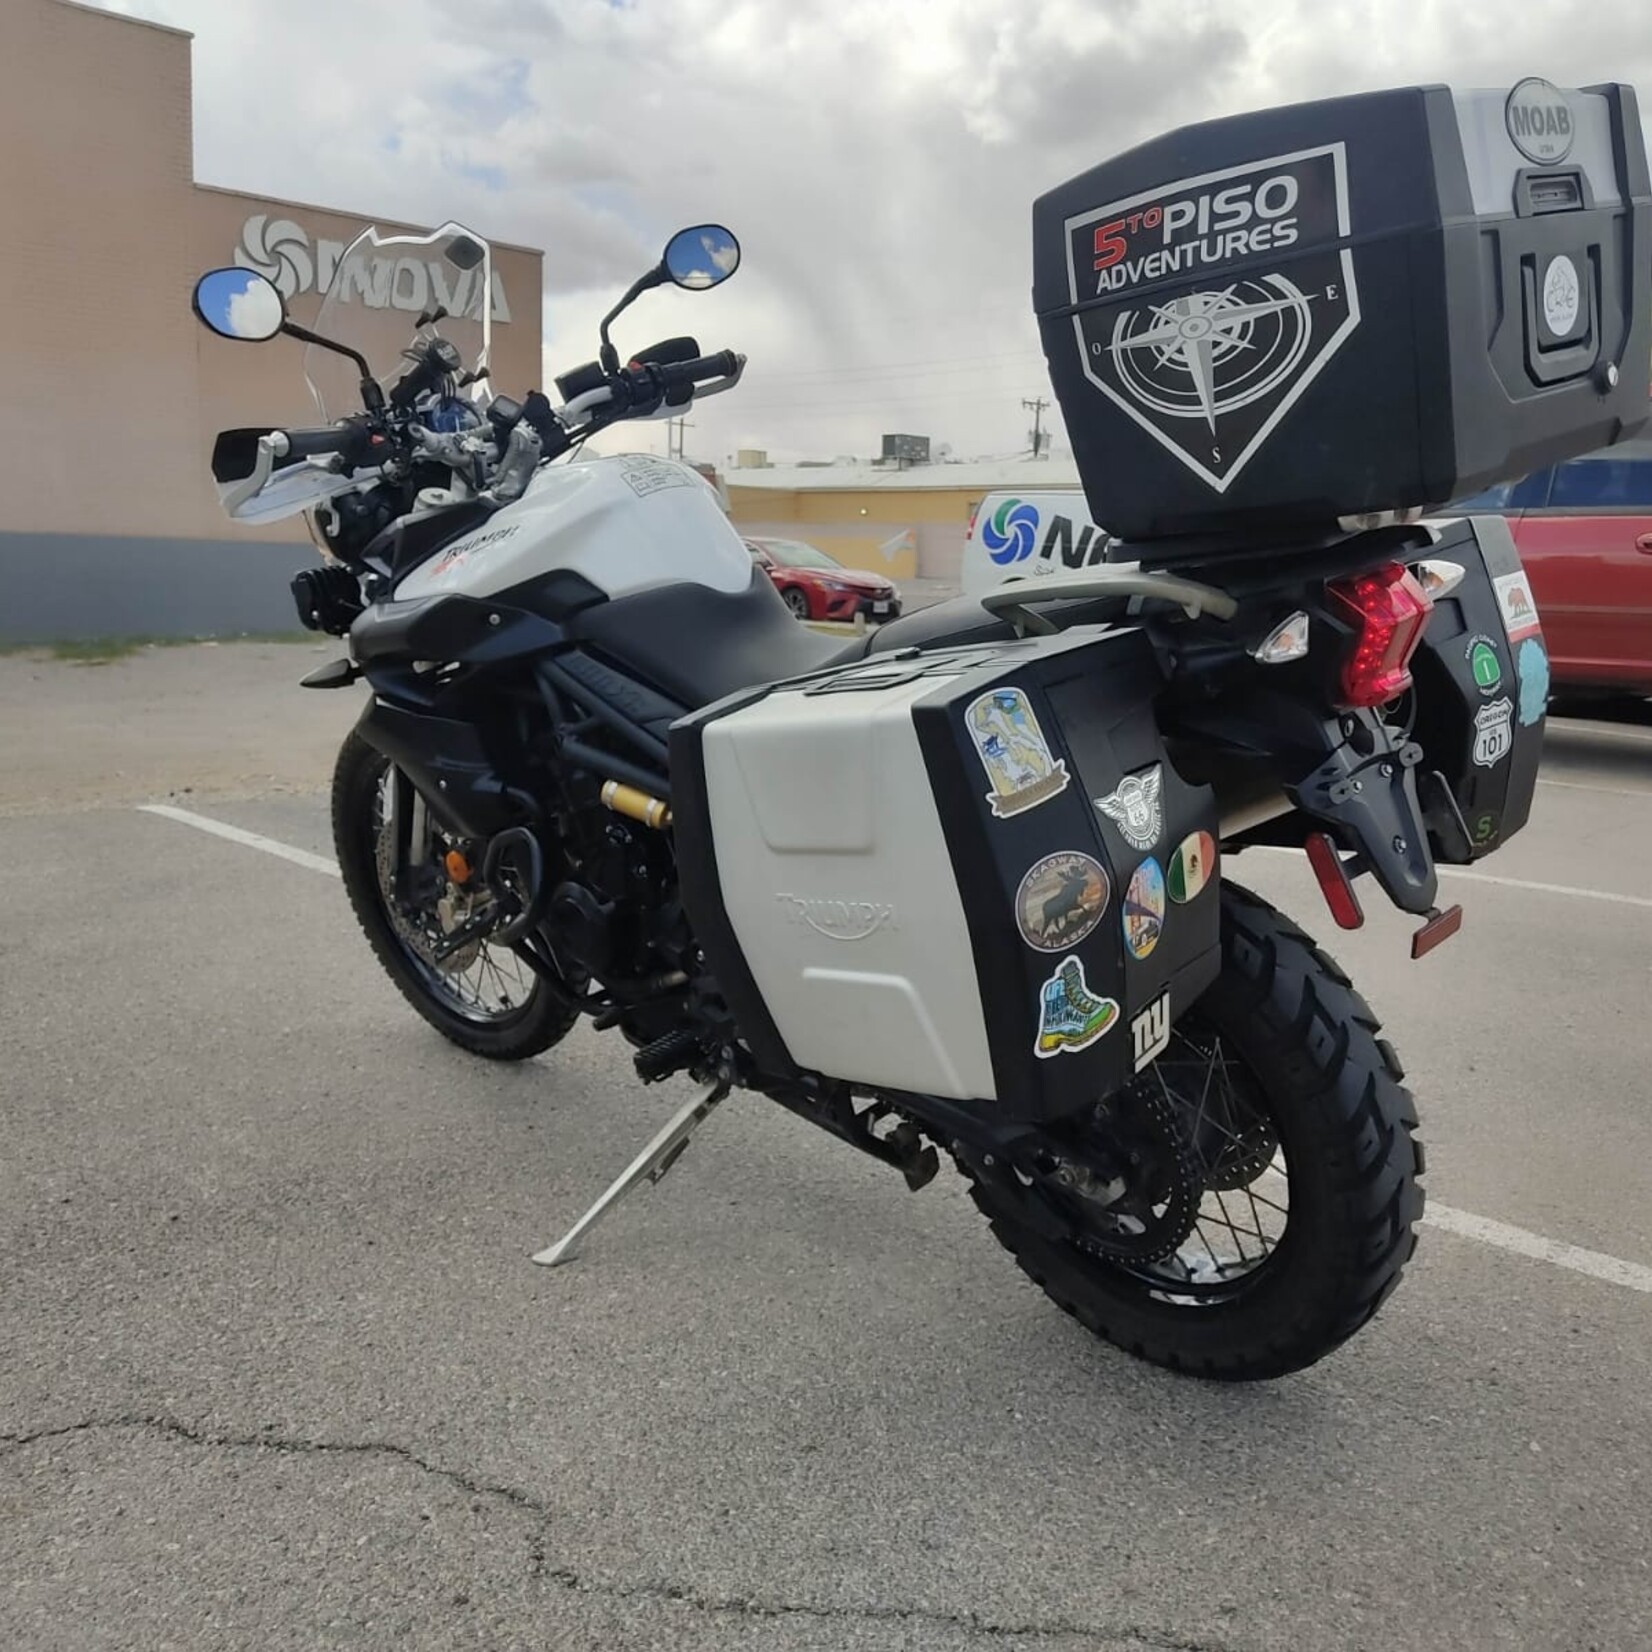 2014 Triumph Tiger 800 XC ABS Adventure Motorcycle for Sale